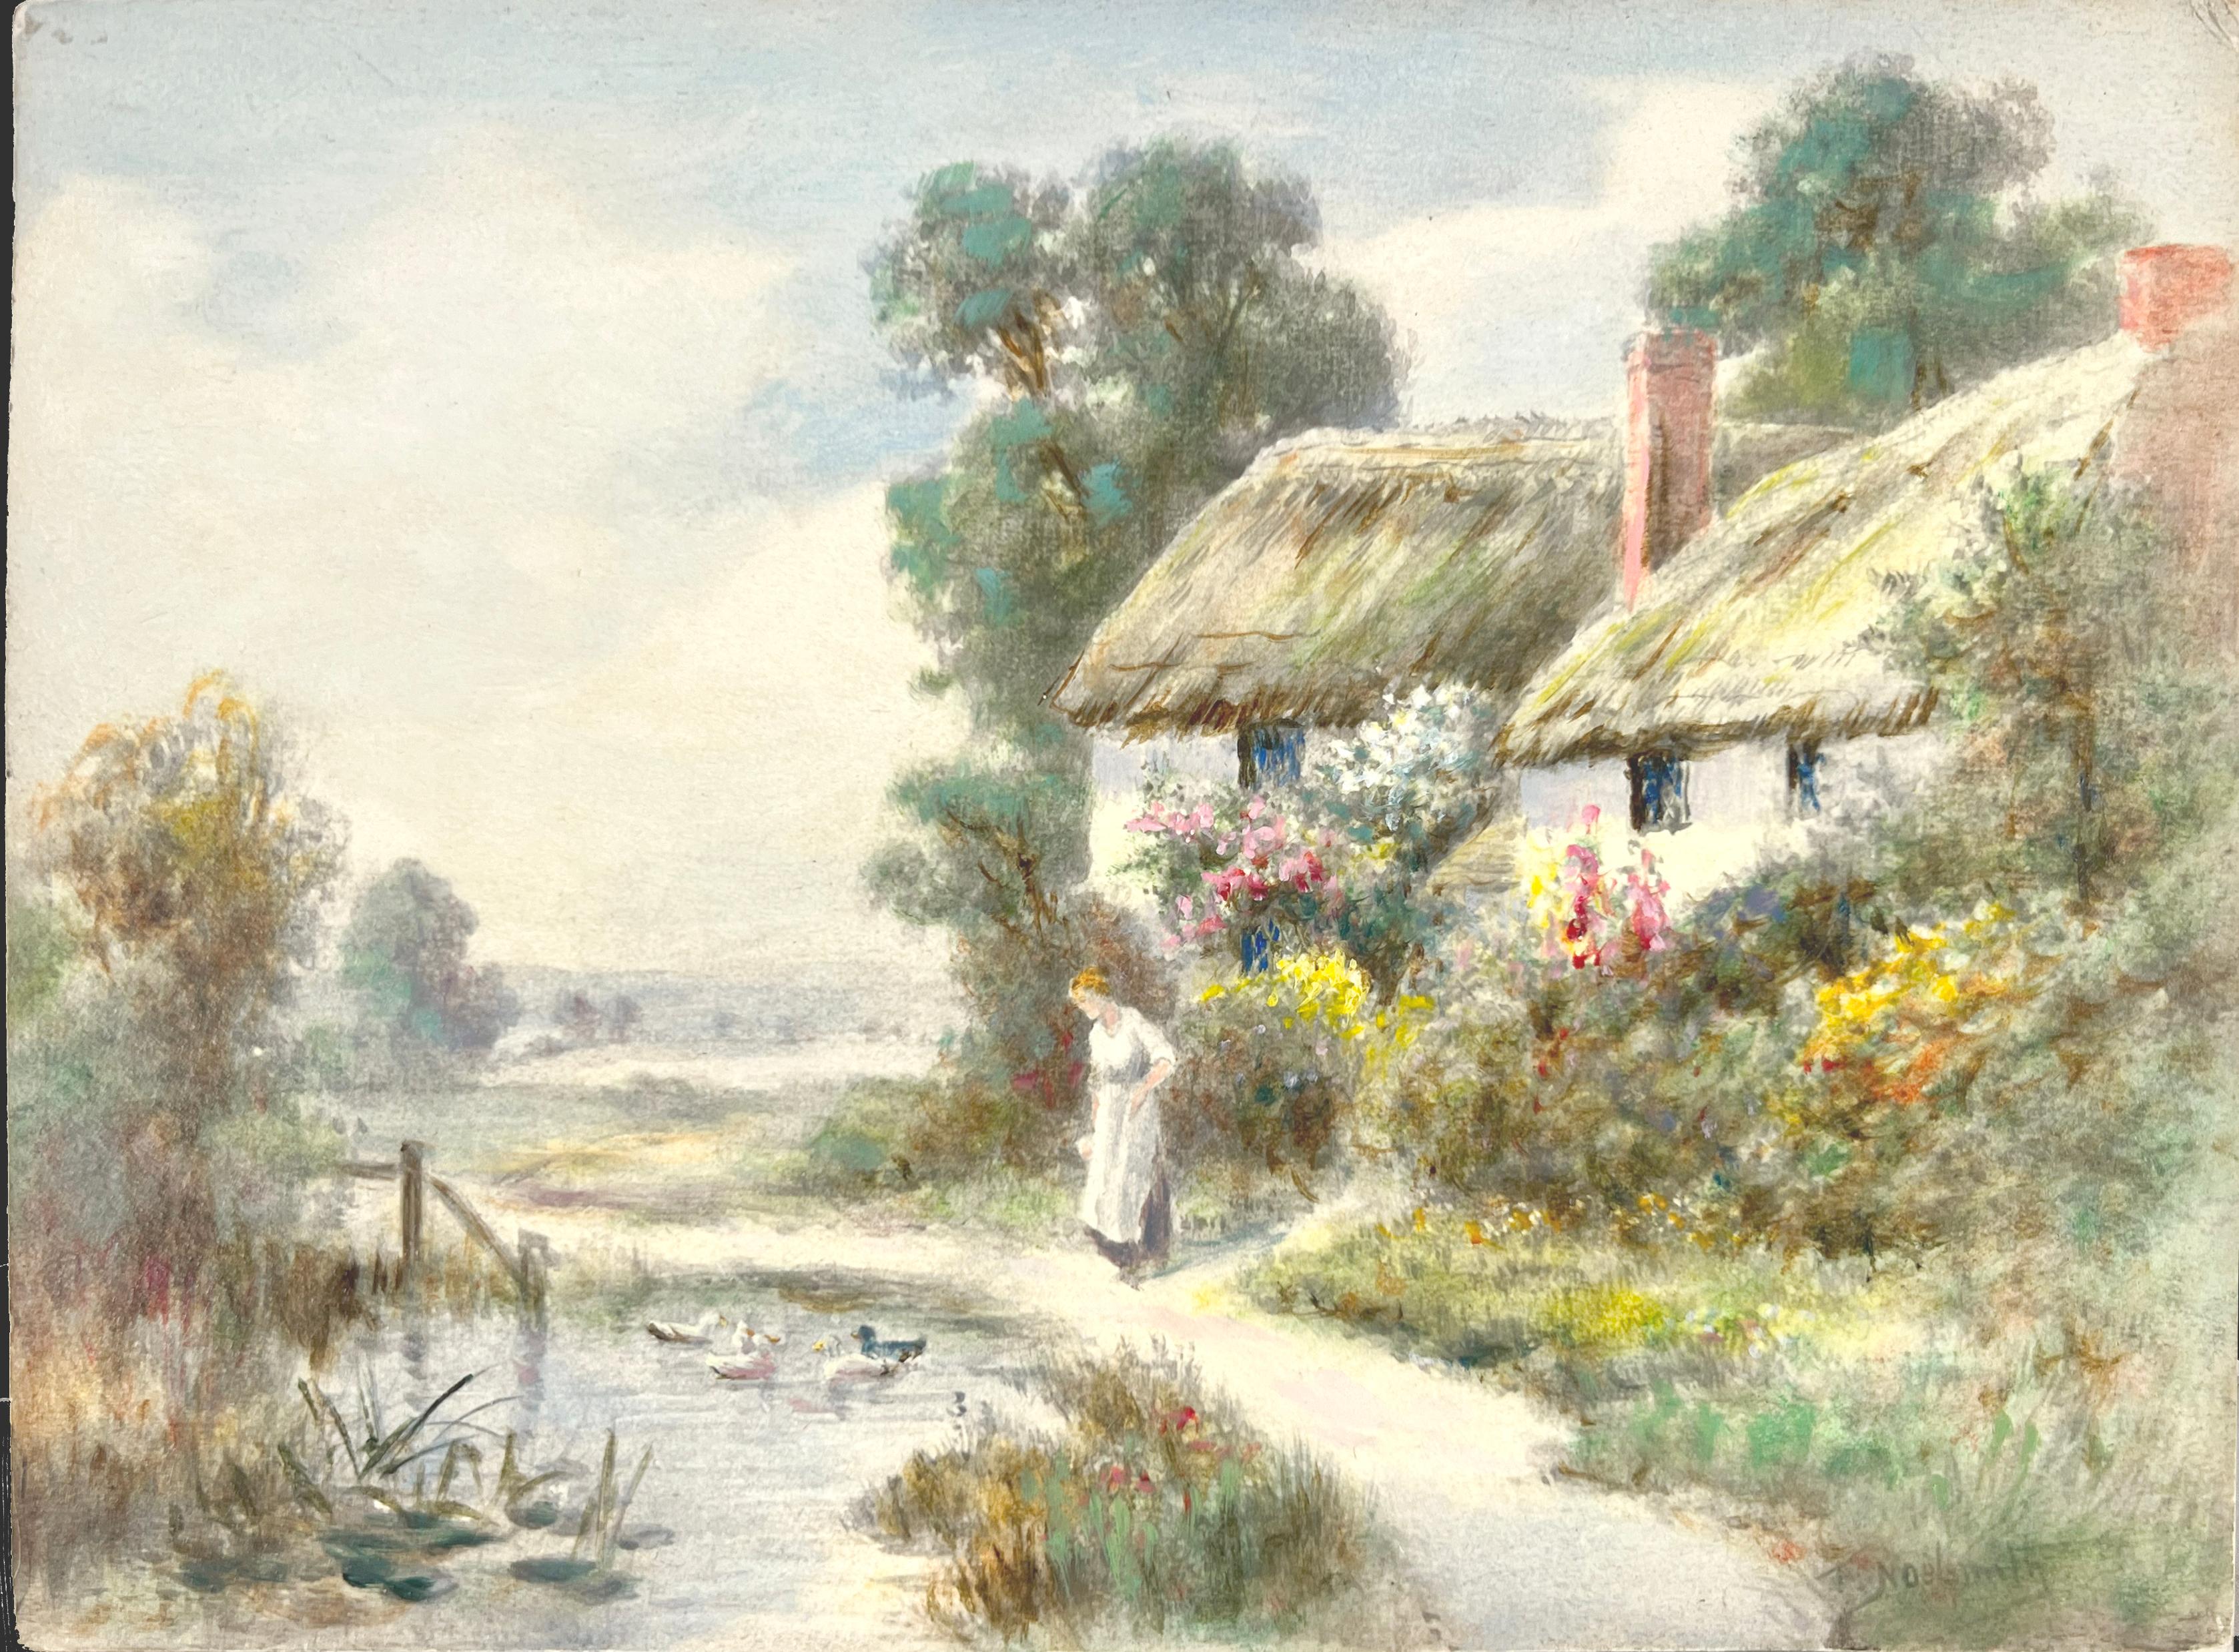  Late 19th Century Original English Landscape of a Cottage in Cambria - Painting by Thomas Noel Smith